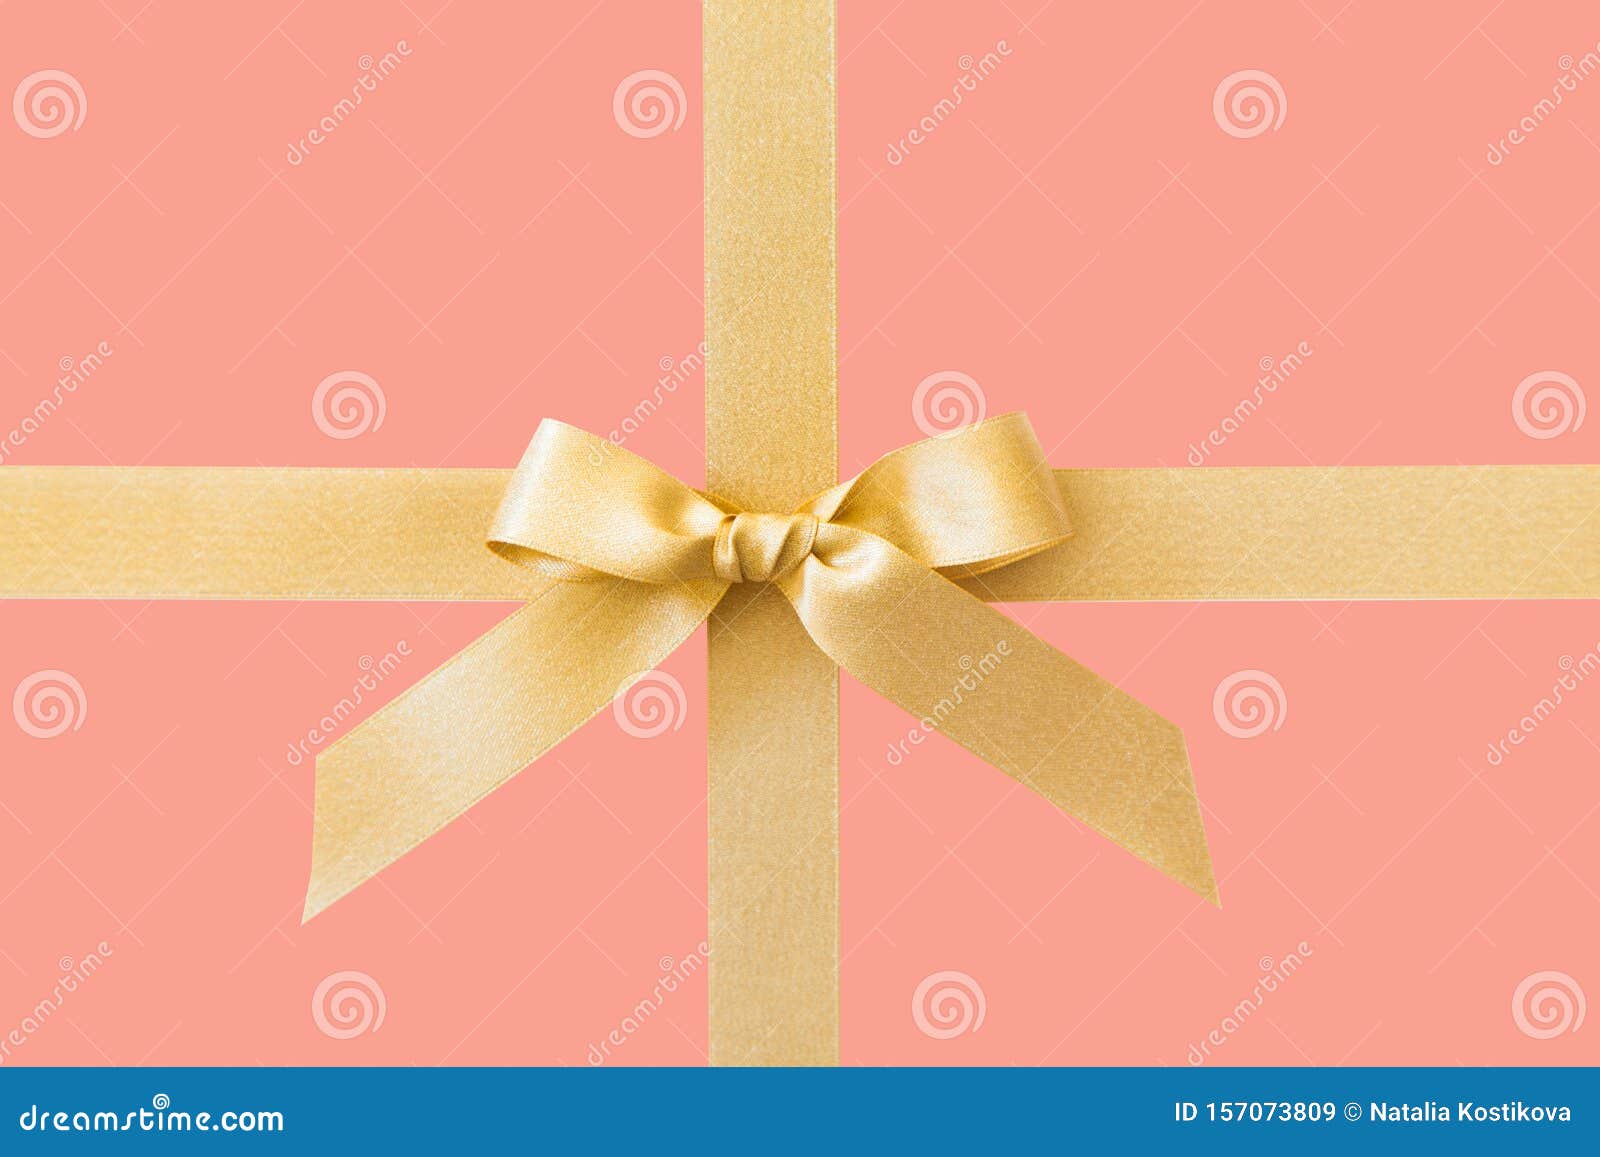 Golden Thin Ribbon Stock Photos and Pictures - 1,997 Images